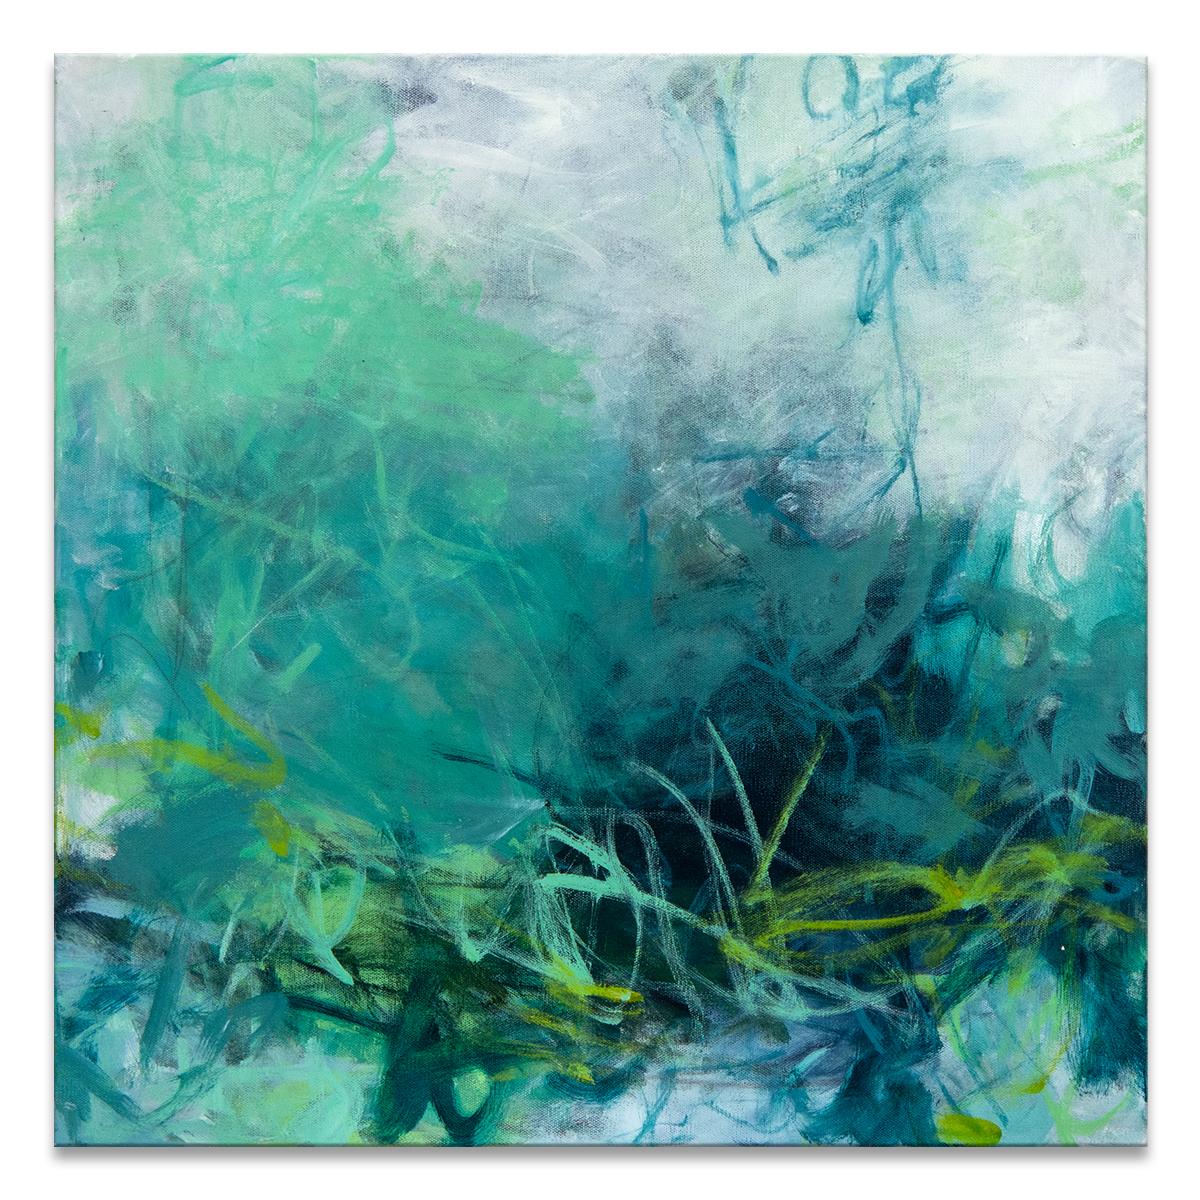 ‘Wading in the Shallows' Wrapped Canvas Original Painting features a vibrant abstract aesthetic in tones of green, teal, gray and yellow-green. Inspired by nature and Bible verse Samuel 1:11, Tammy Keller's positivity and light radiates through her